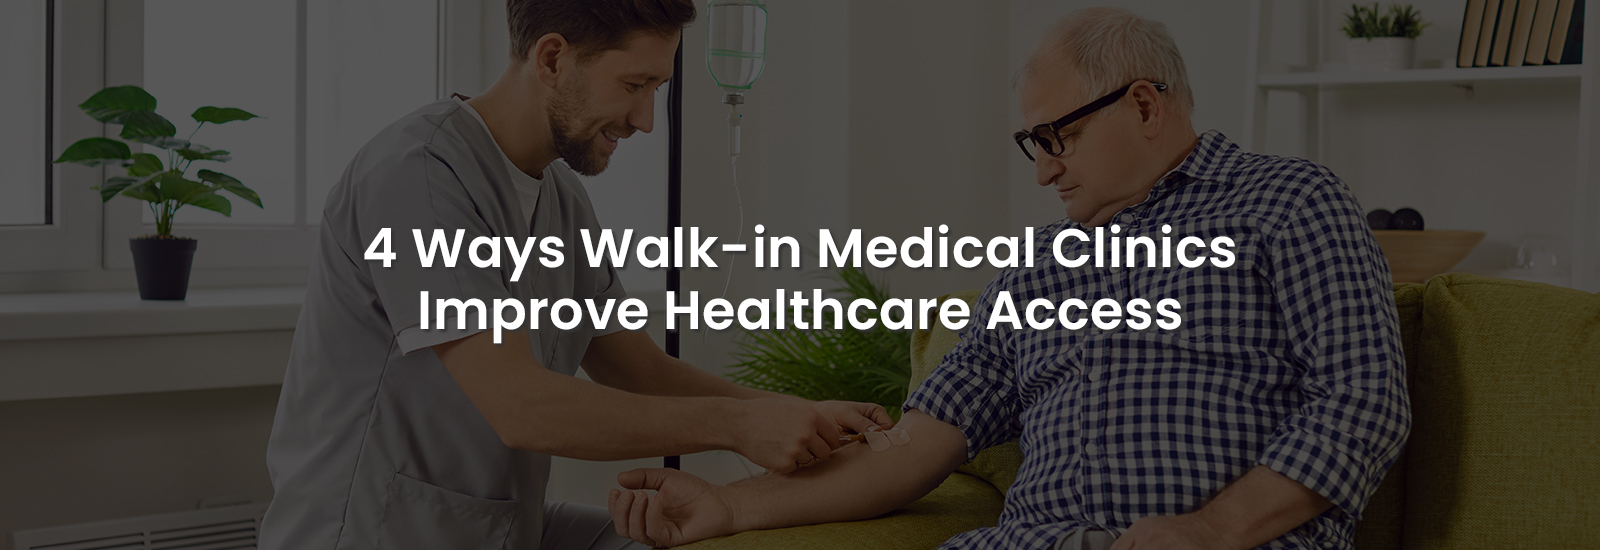 4 Ways in Which Walk-in Medical Clinics Are Improving Healthcare Access | Banner Image